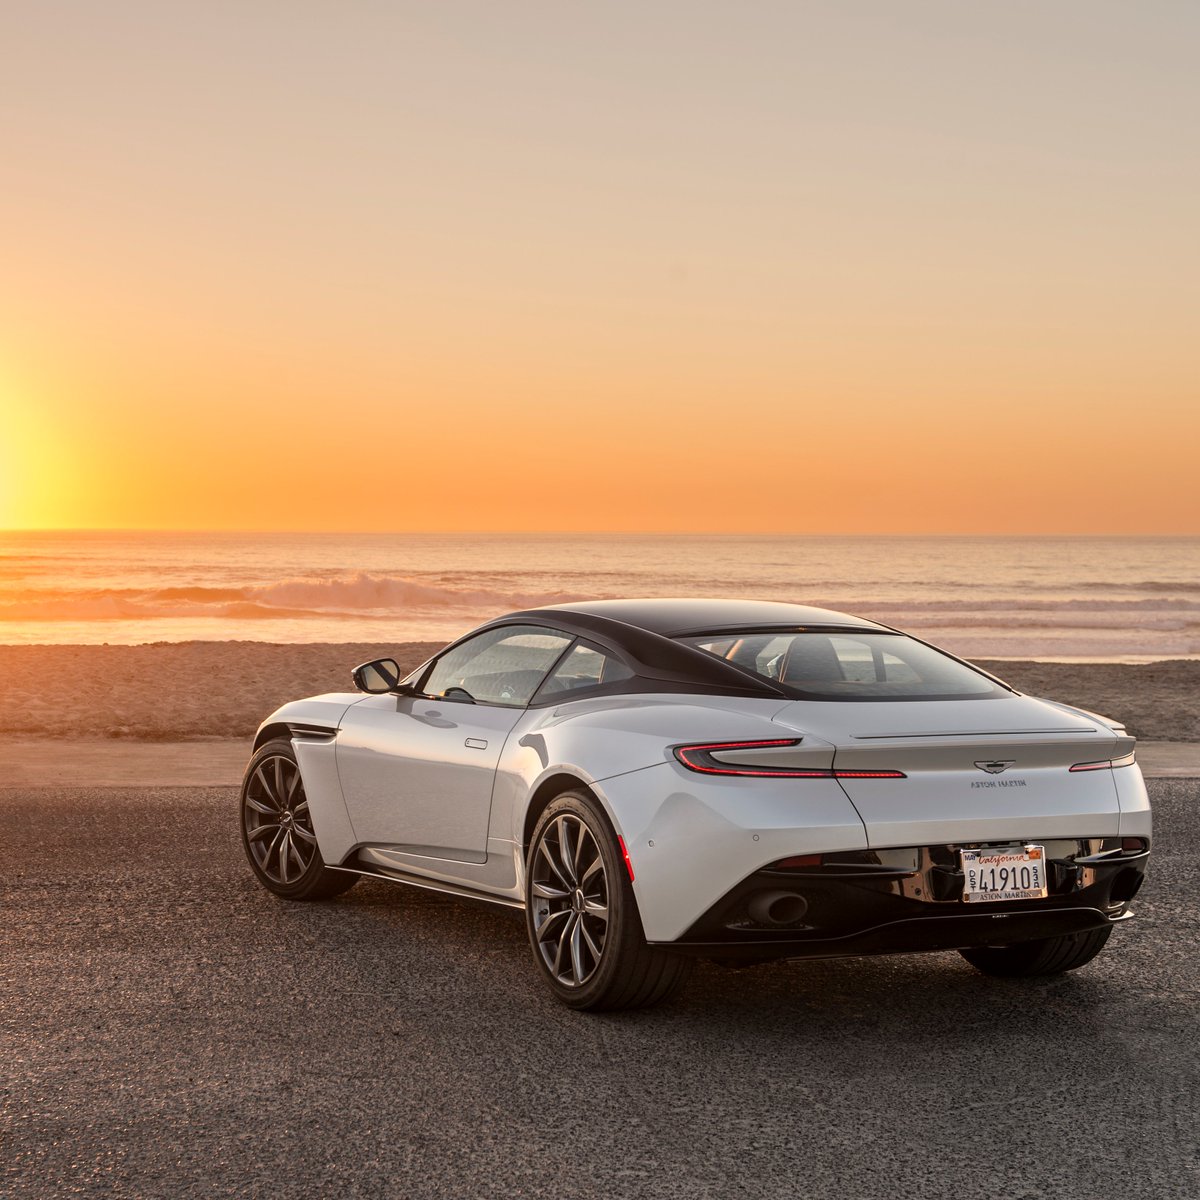 As refined as ever, DB11 is a modern icon in the automotive industry.

#DB11 #AstonMartin #BeautifulIsANumber